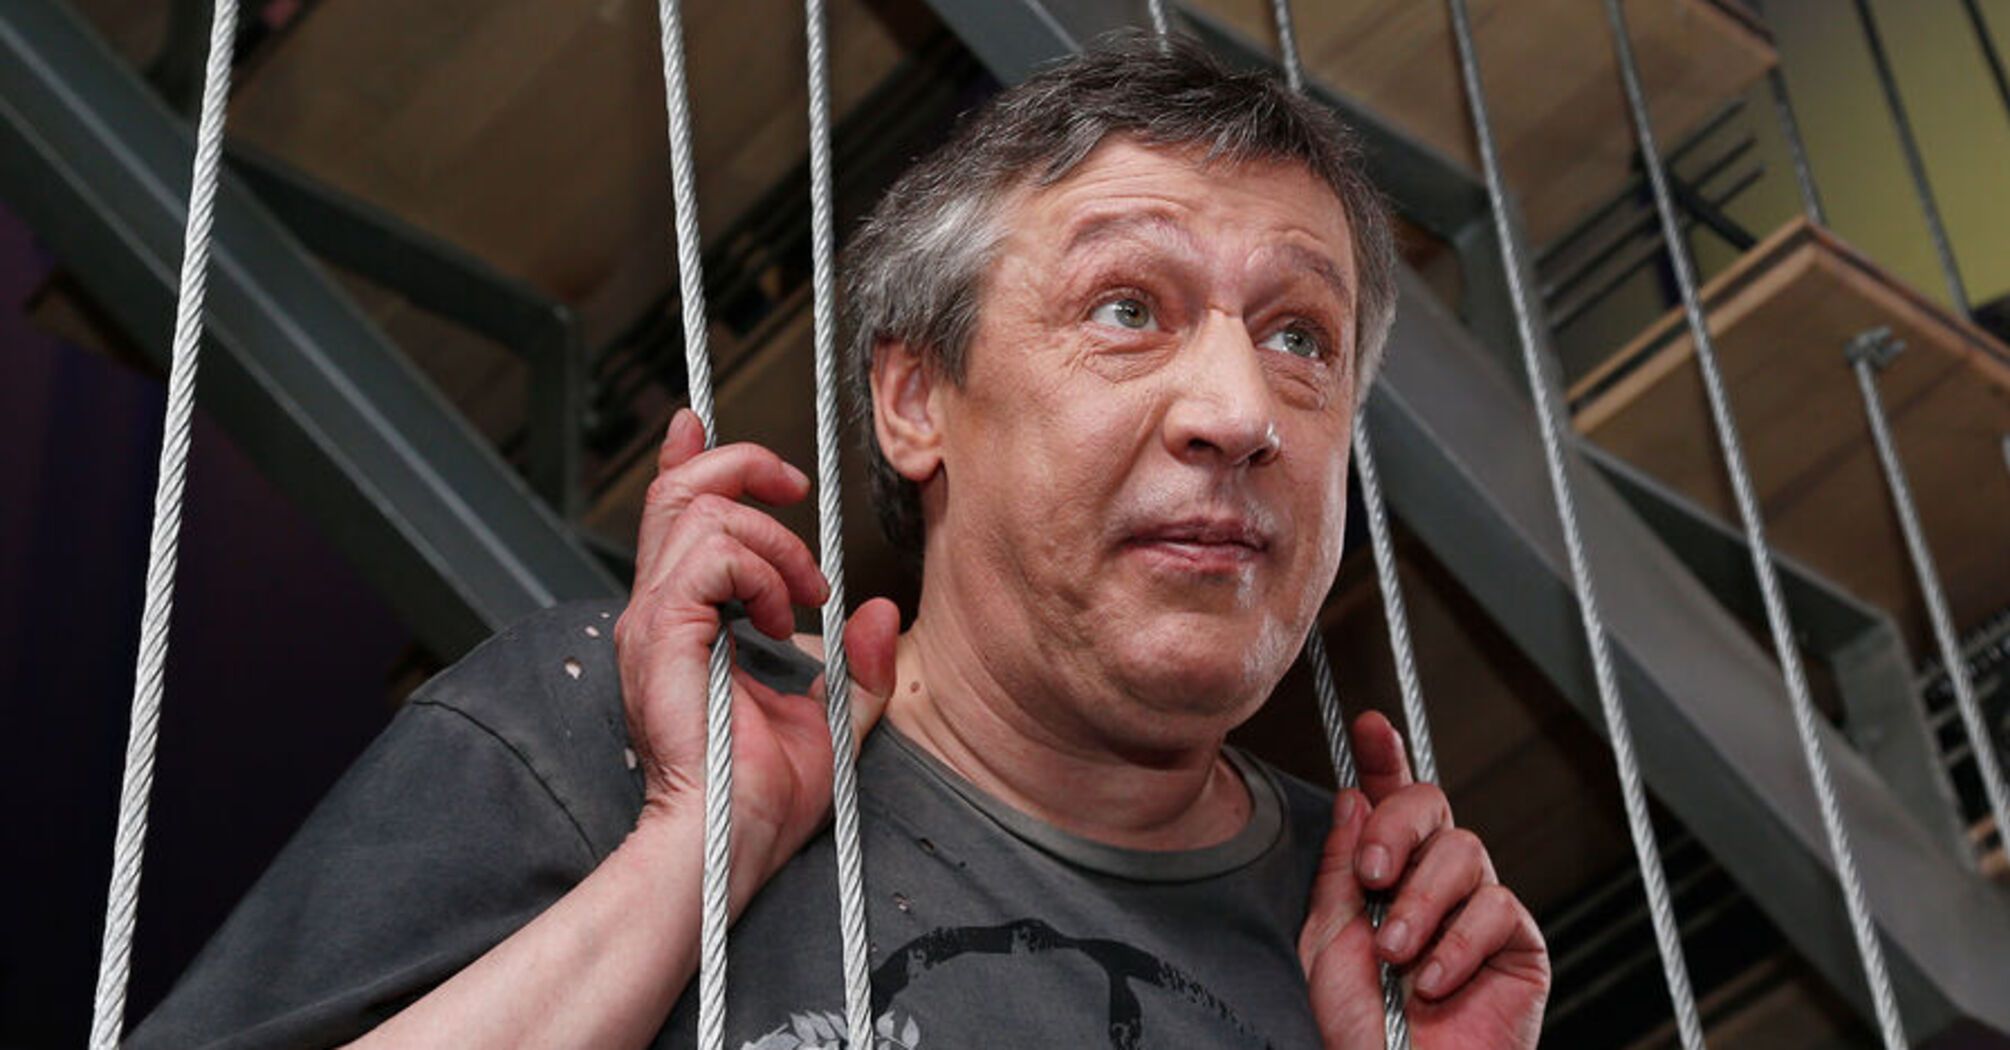 Russian actor Efremov, convicted for fatal traffic accident, may be released if he agrees to join the army